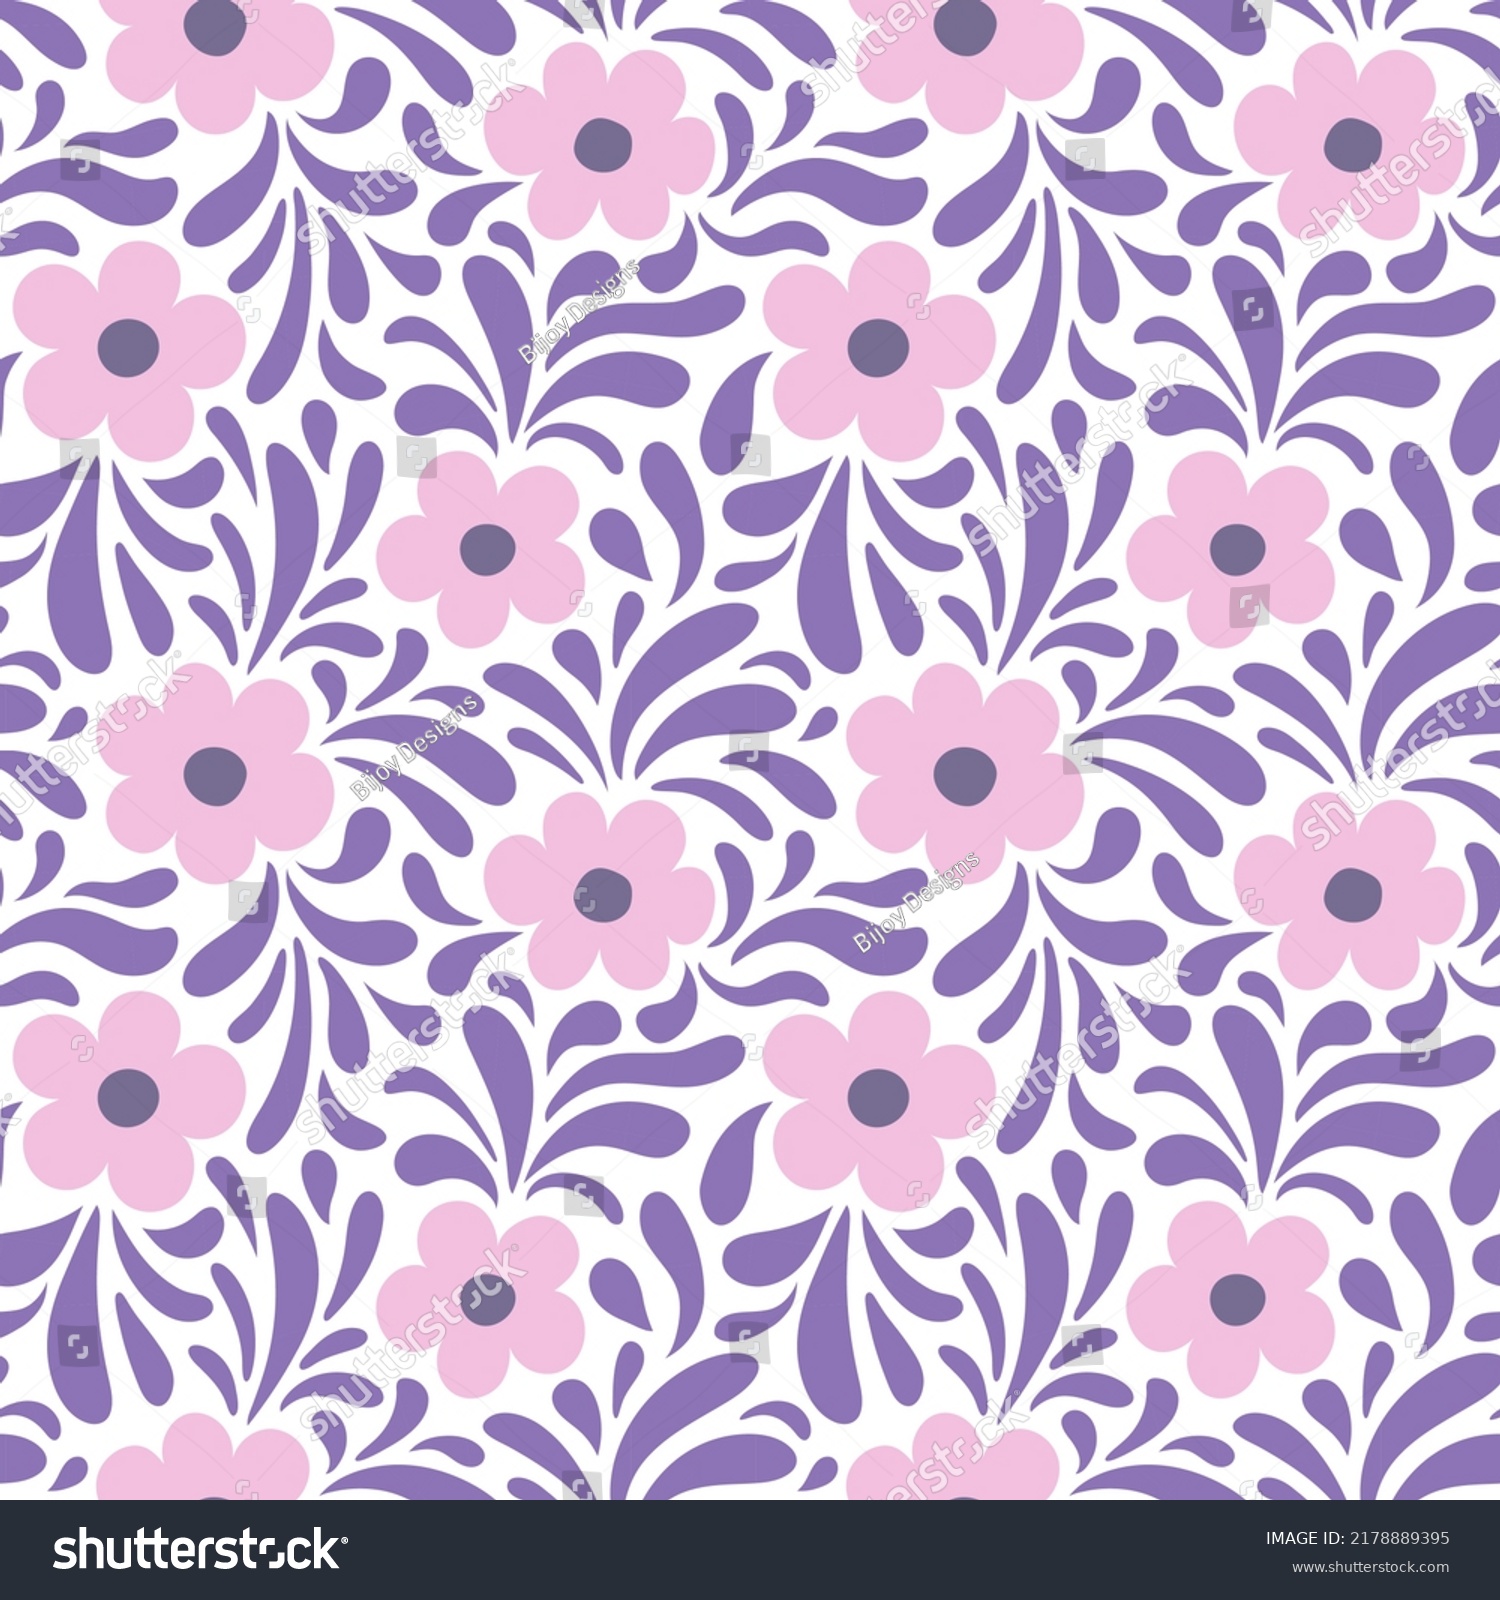 Pink And Purple Floral Swirls Seamless Pattern.  Ethic background for fabric, wrapping and paper. Decorative print. Hand Drawn Swirls Flowers.